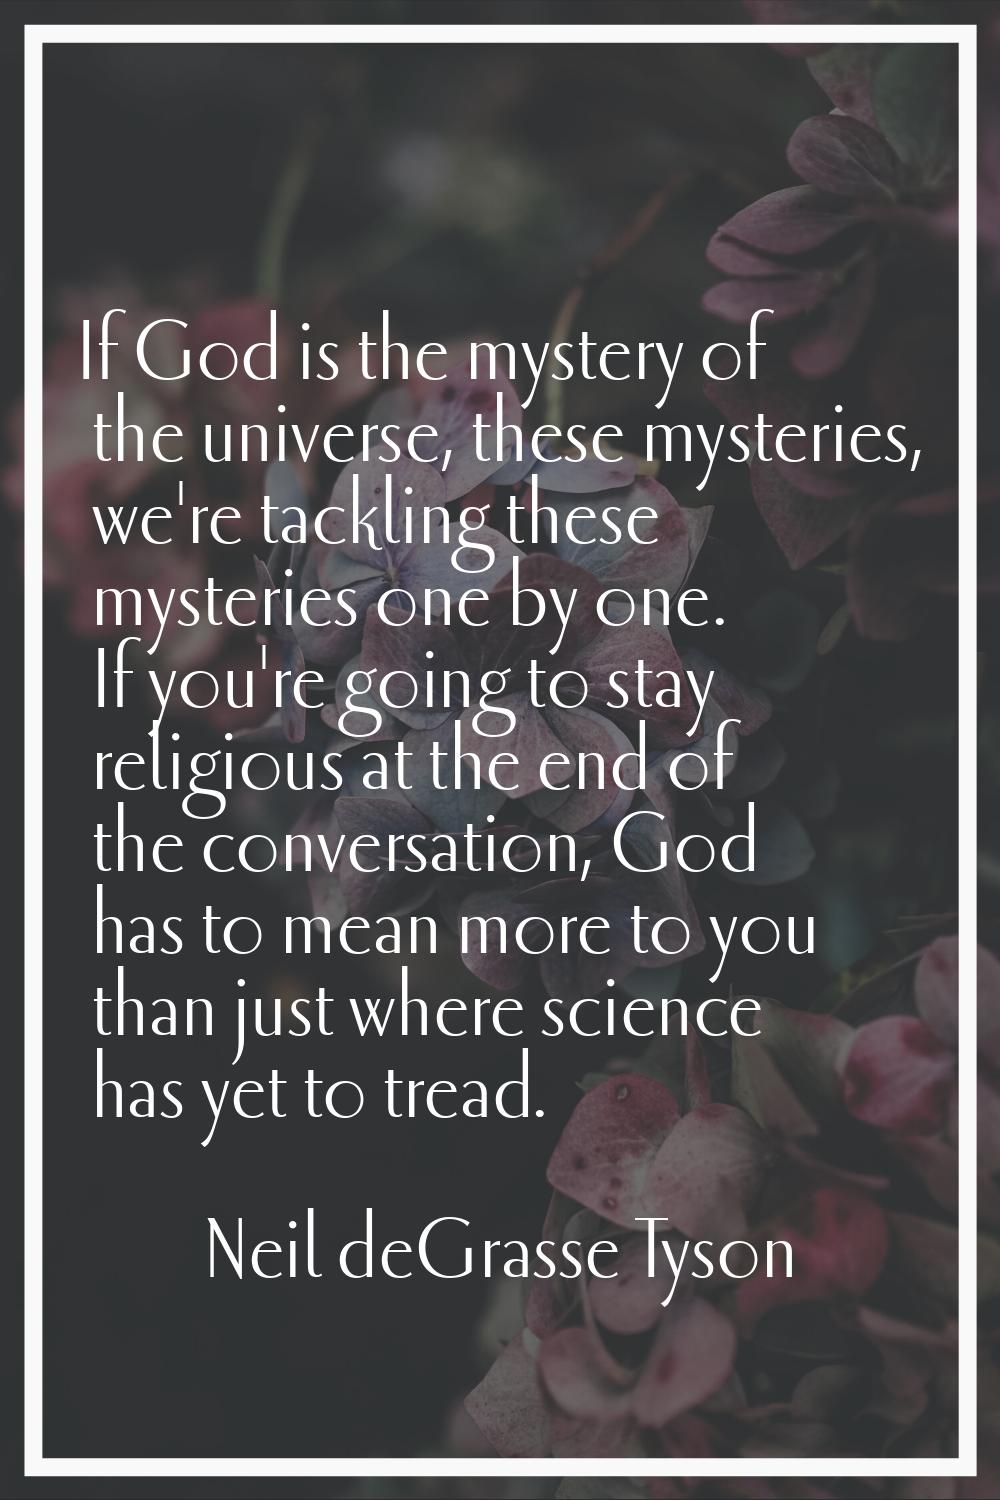 If God is the mystery of the universe, these mysteries, we're tackling these mysteries one by one. 